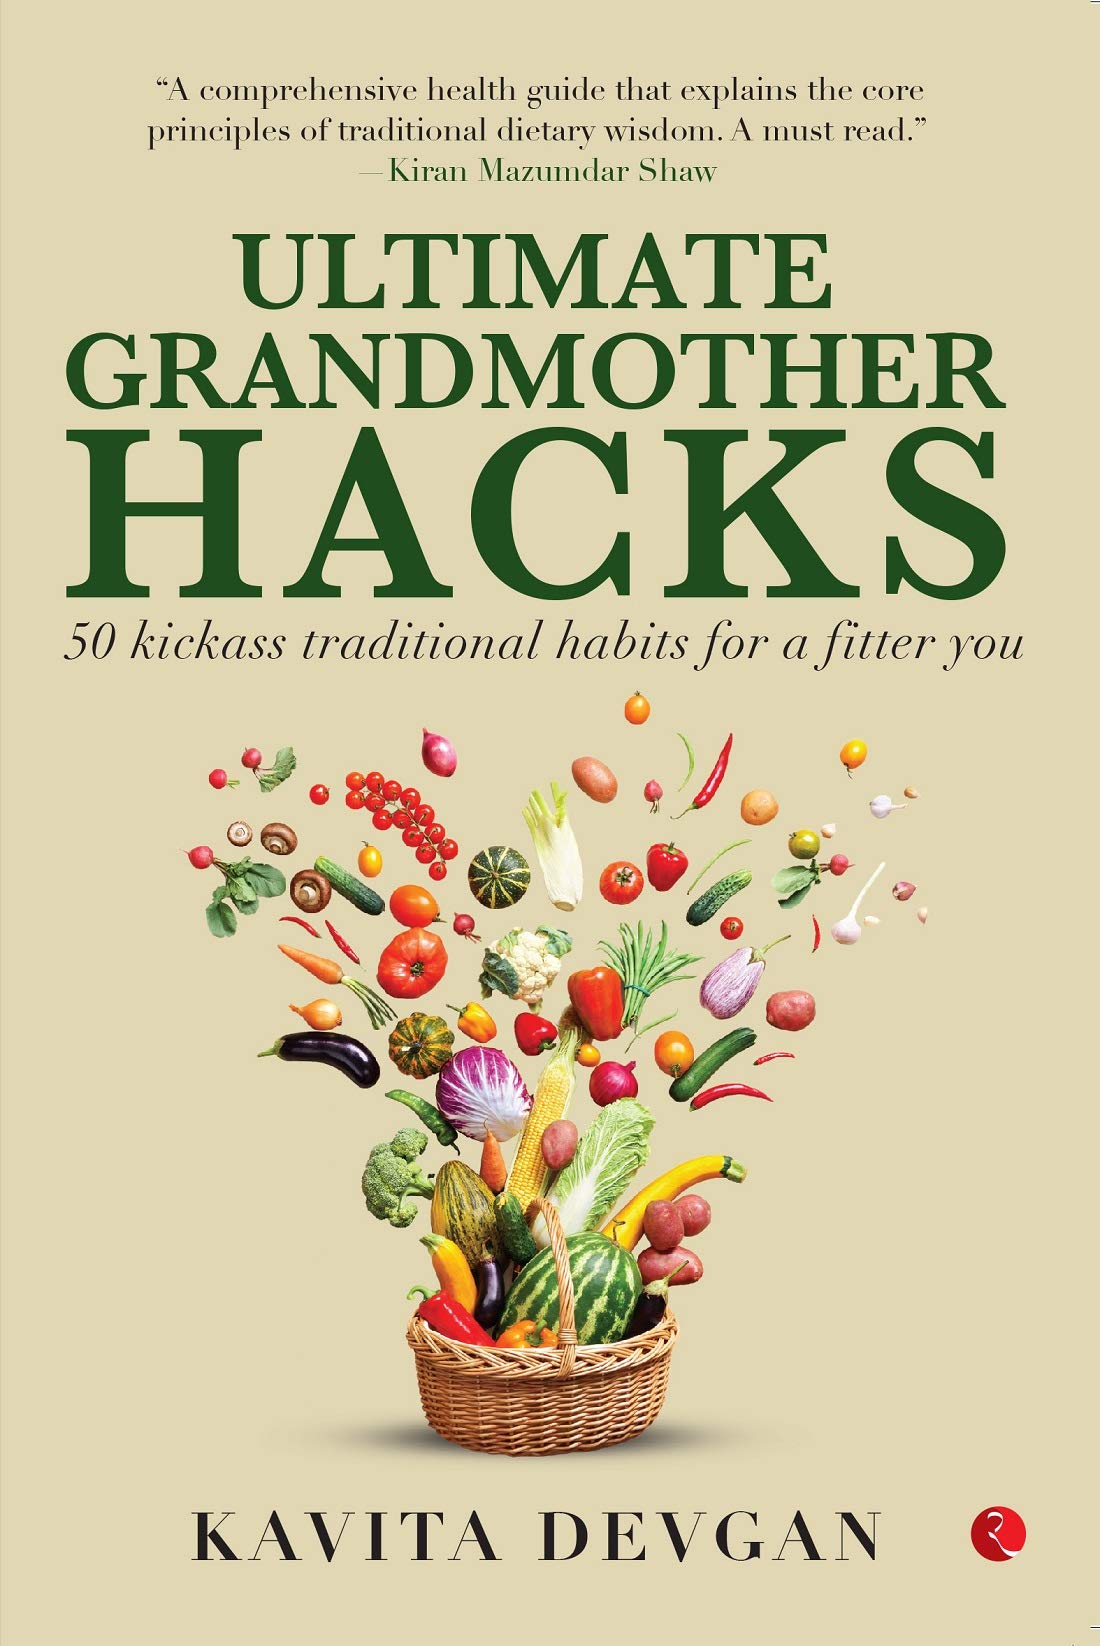 Ultimate Grandmother Hacks: 50 Kickass Traditional habits for a Fitter You